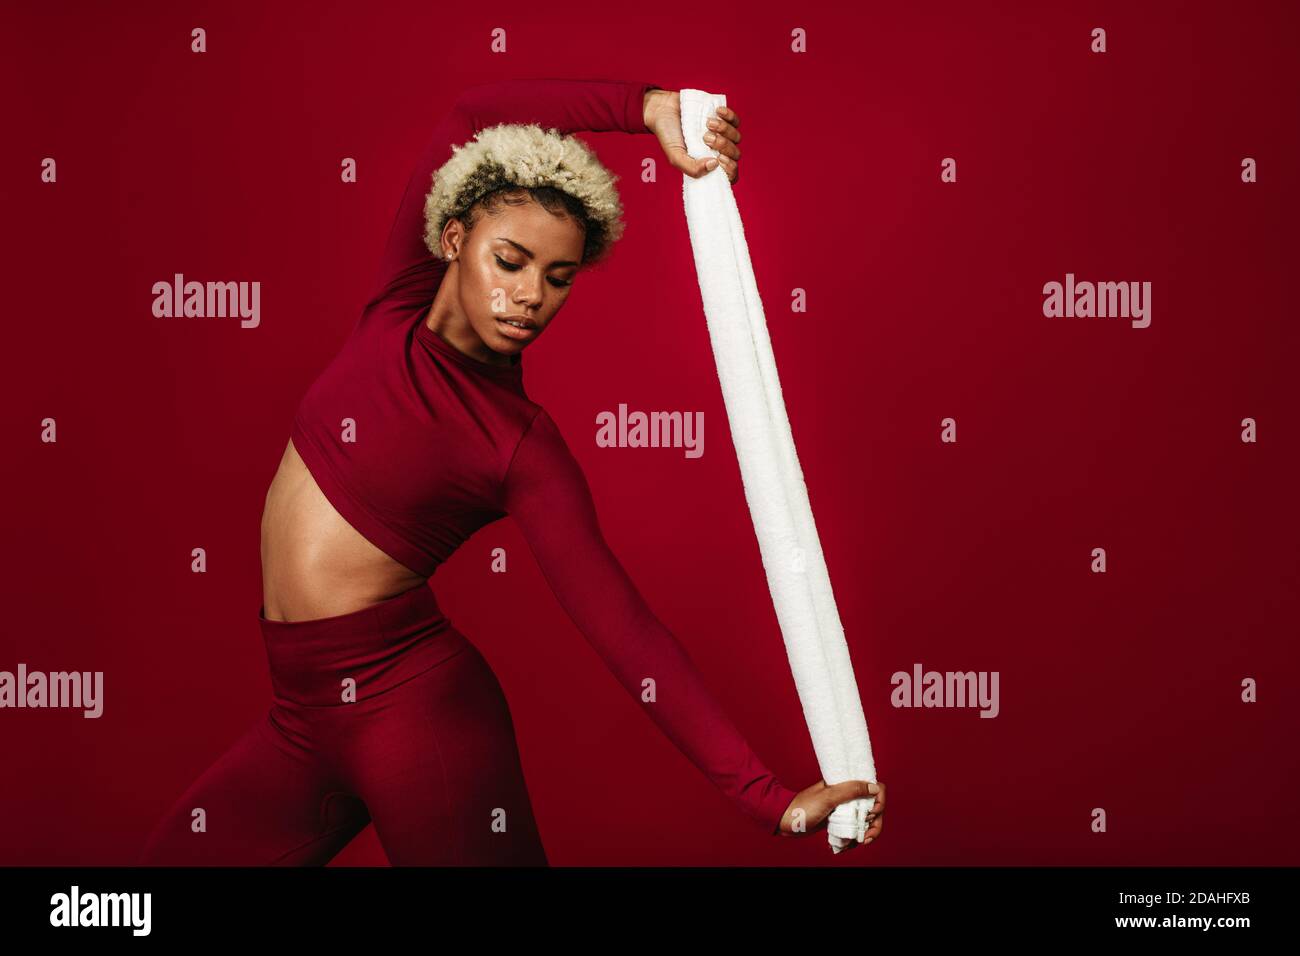 African american fitness woman working out on flexibility using a towel. Athletic woman doing fitness exercise against maroon background. Stock Photo